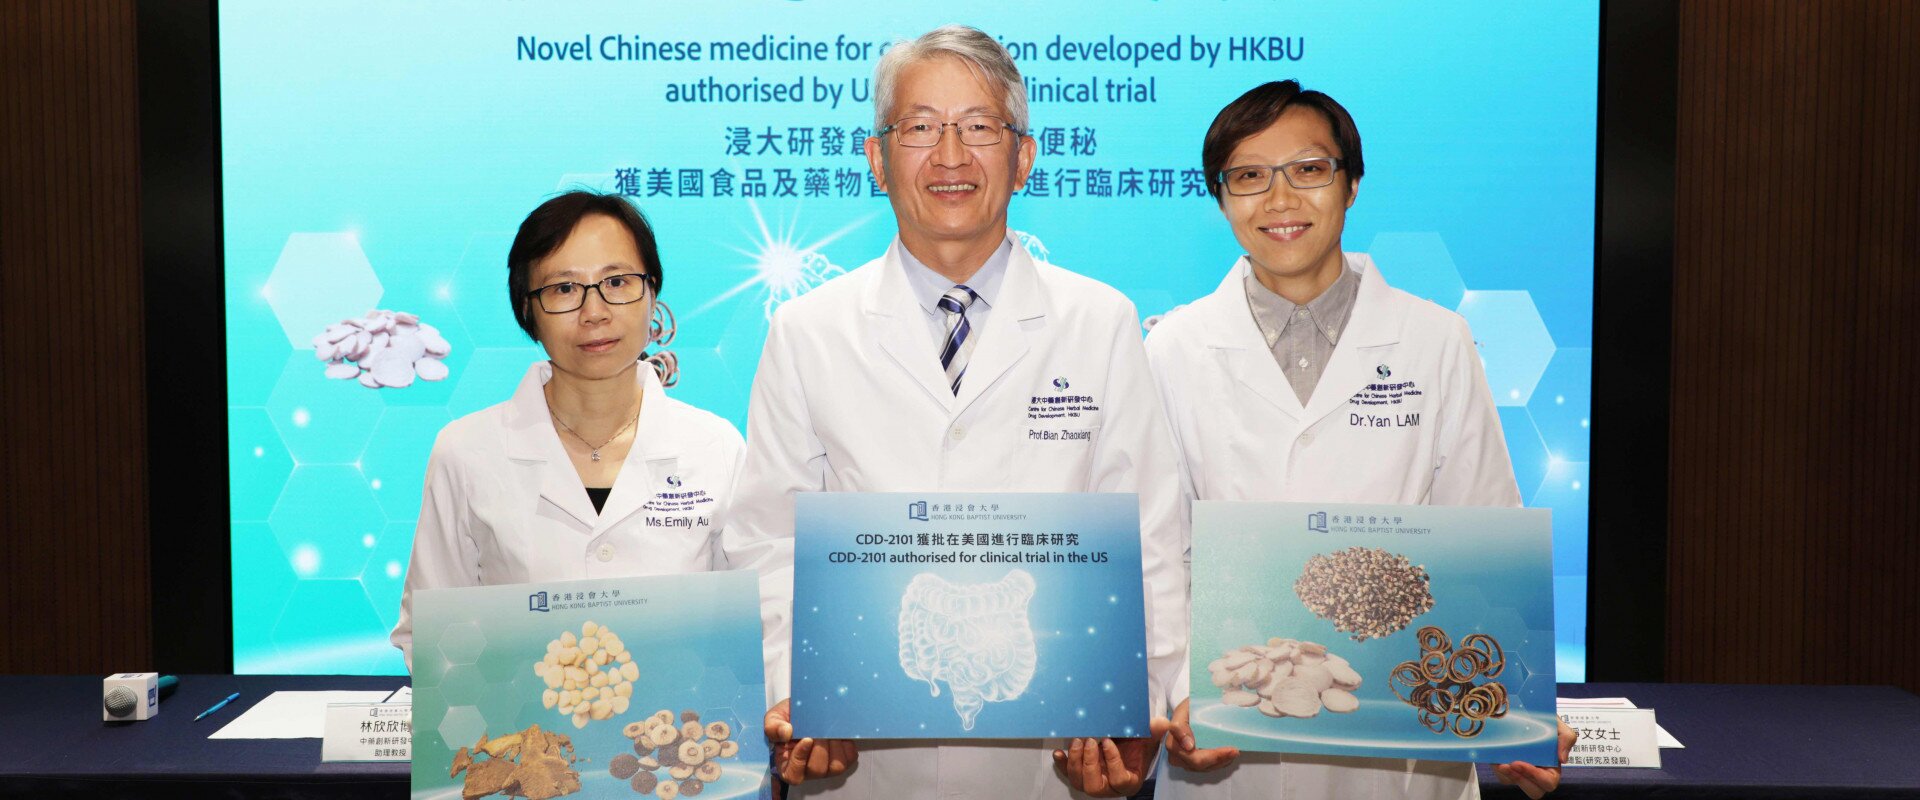 authorised by U.S. FDA to conduct clinical trial for novel Chinese medicine